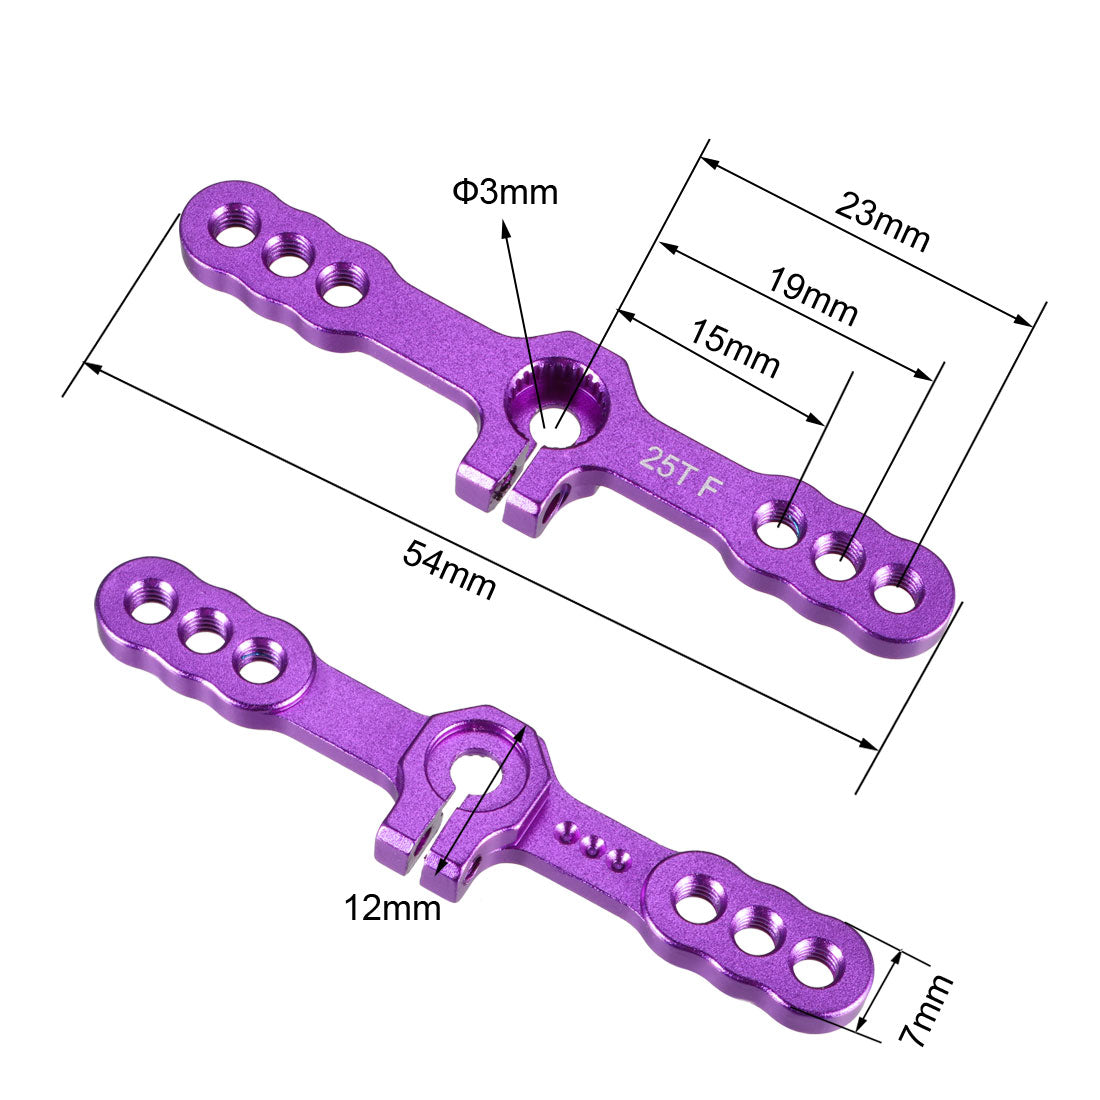 uxcell Uxcell Aluminum Servo Horn 25T M3 Thread Purple, Double Steering Arm for Futaba